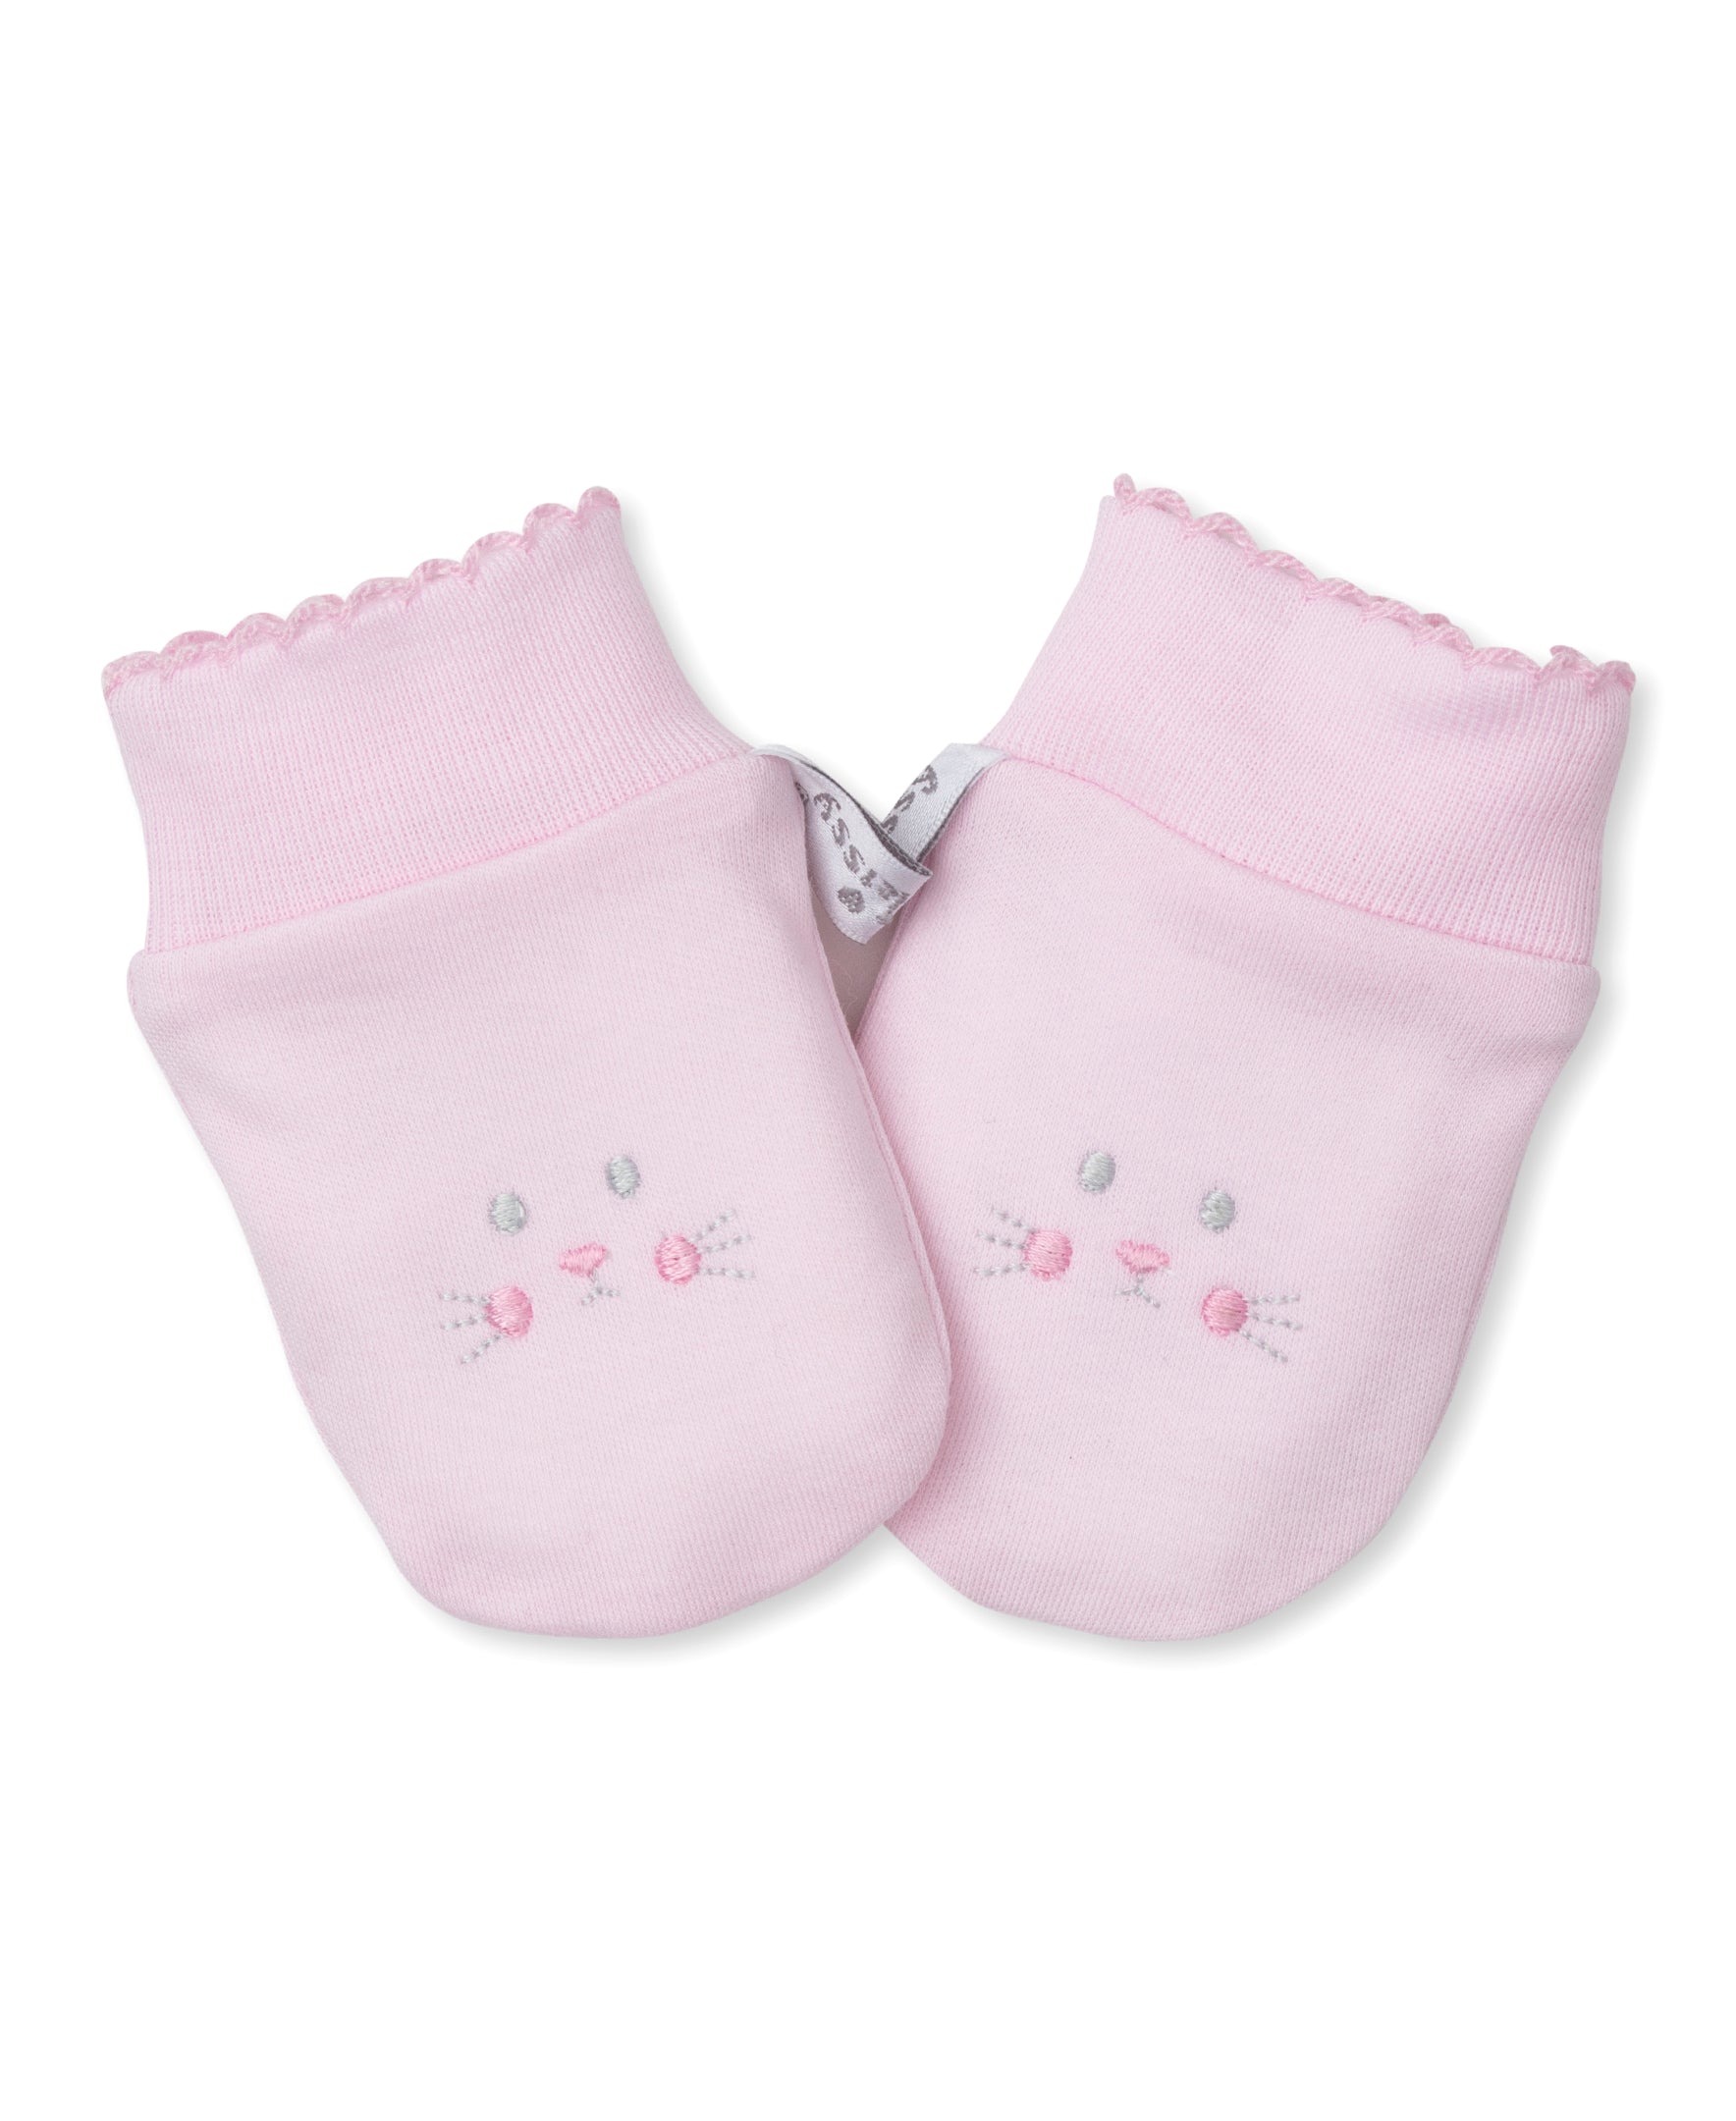 Cottontail Hollows Pink Mitts - Kissy Kissy